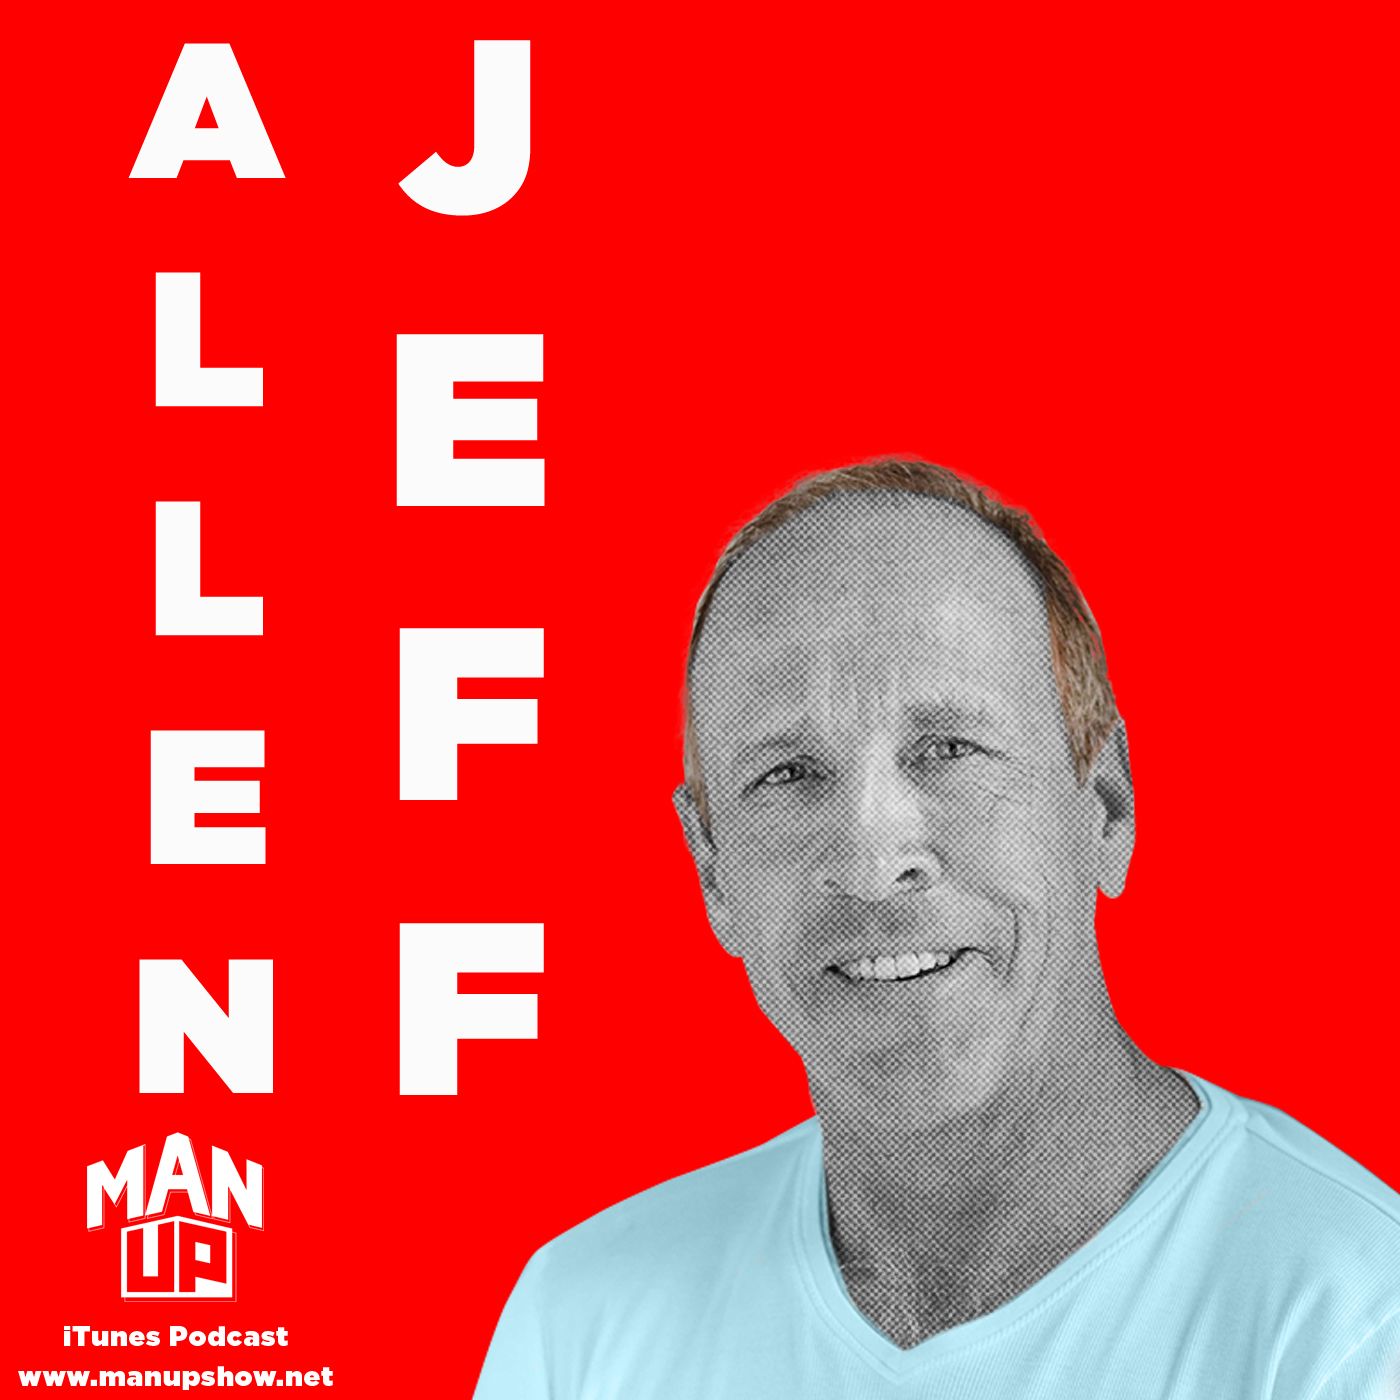 Jeff Allen tells how he went from atheist drug addict to Christian comedy superstar